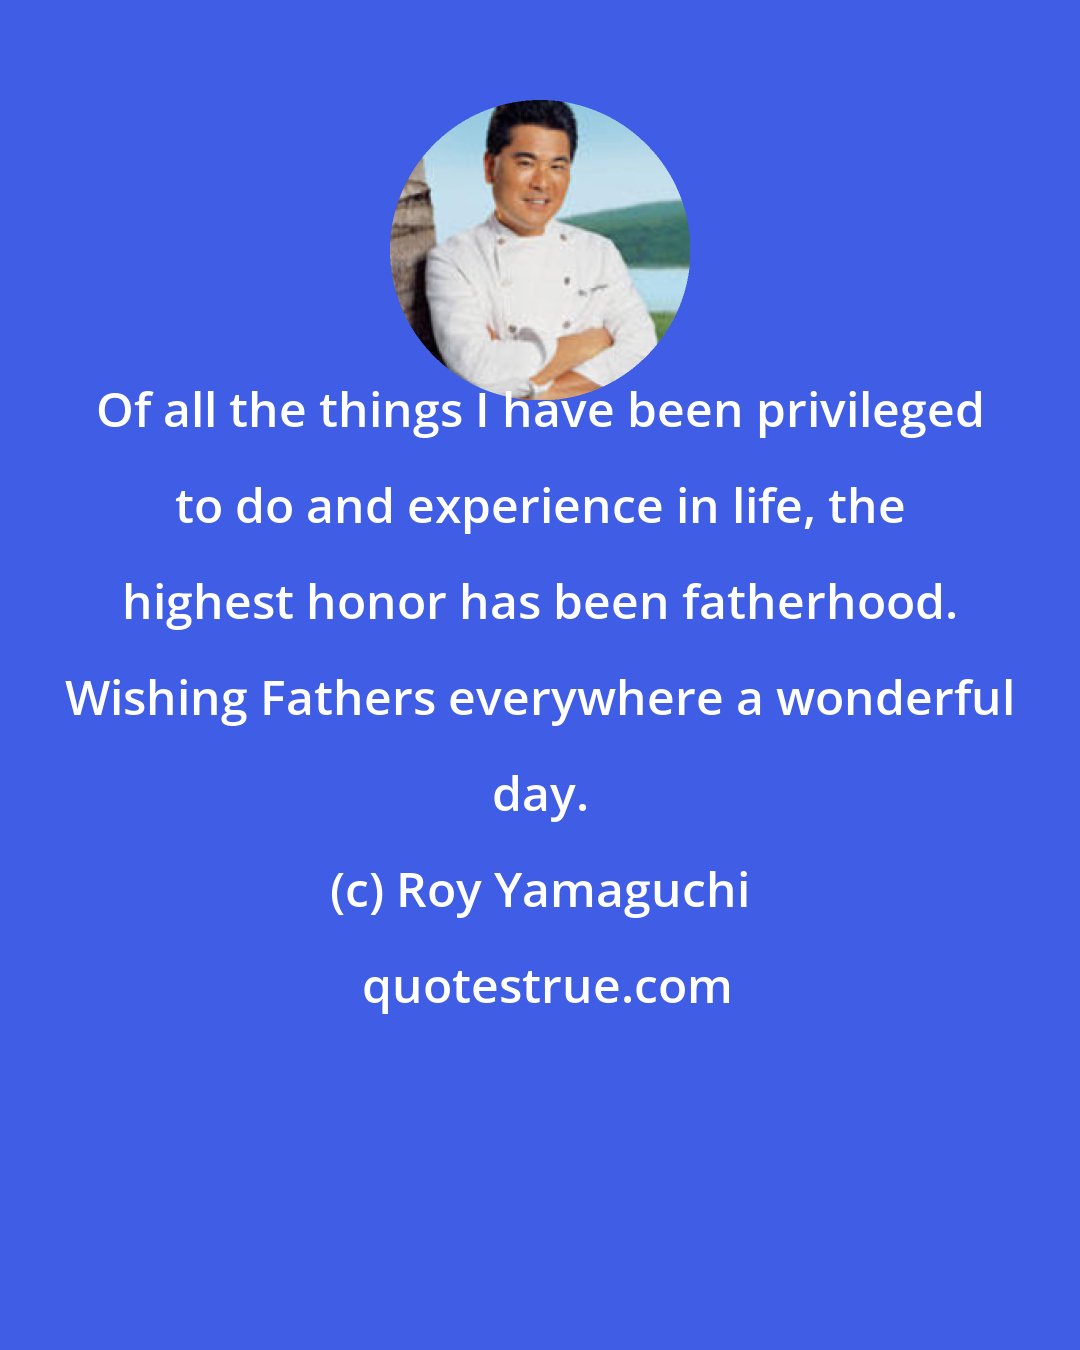 Roy Yamaguchi: Of all the things I have been privileged to do and experience in life, the highest honor has been fatherhood. Wishing Fathers everywhere a wonderful day.